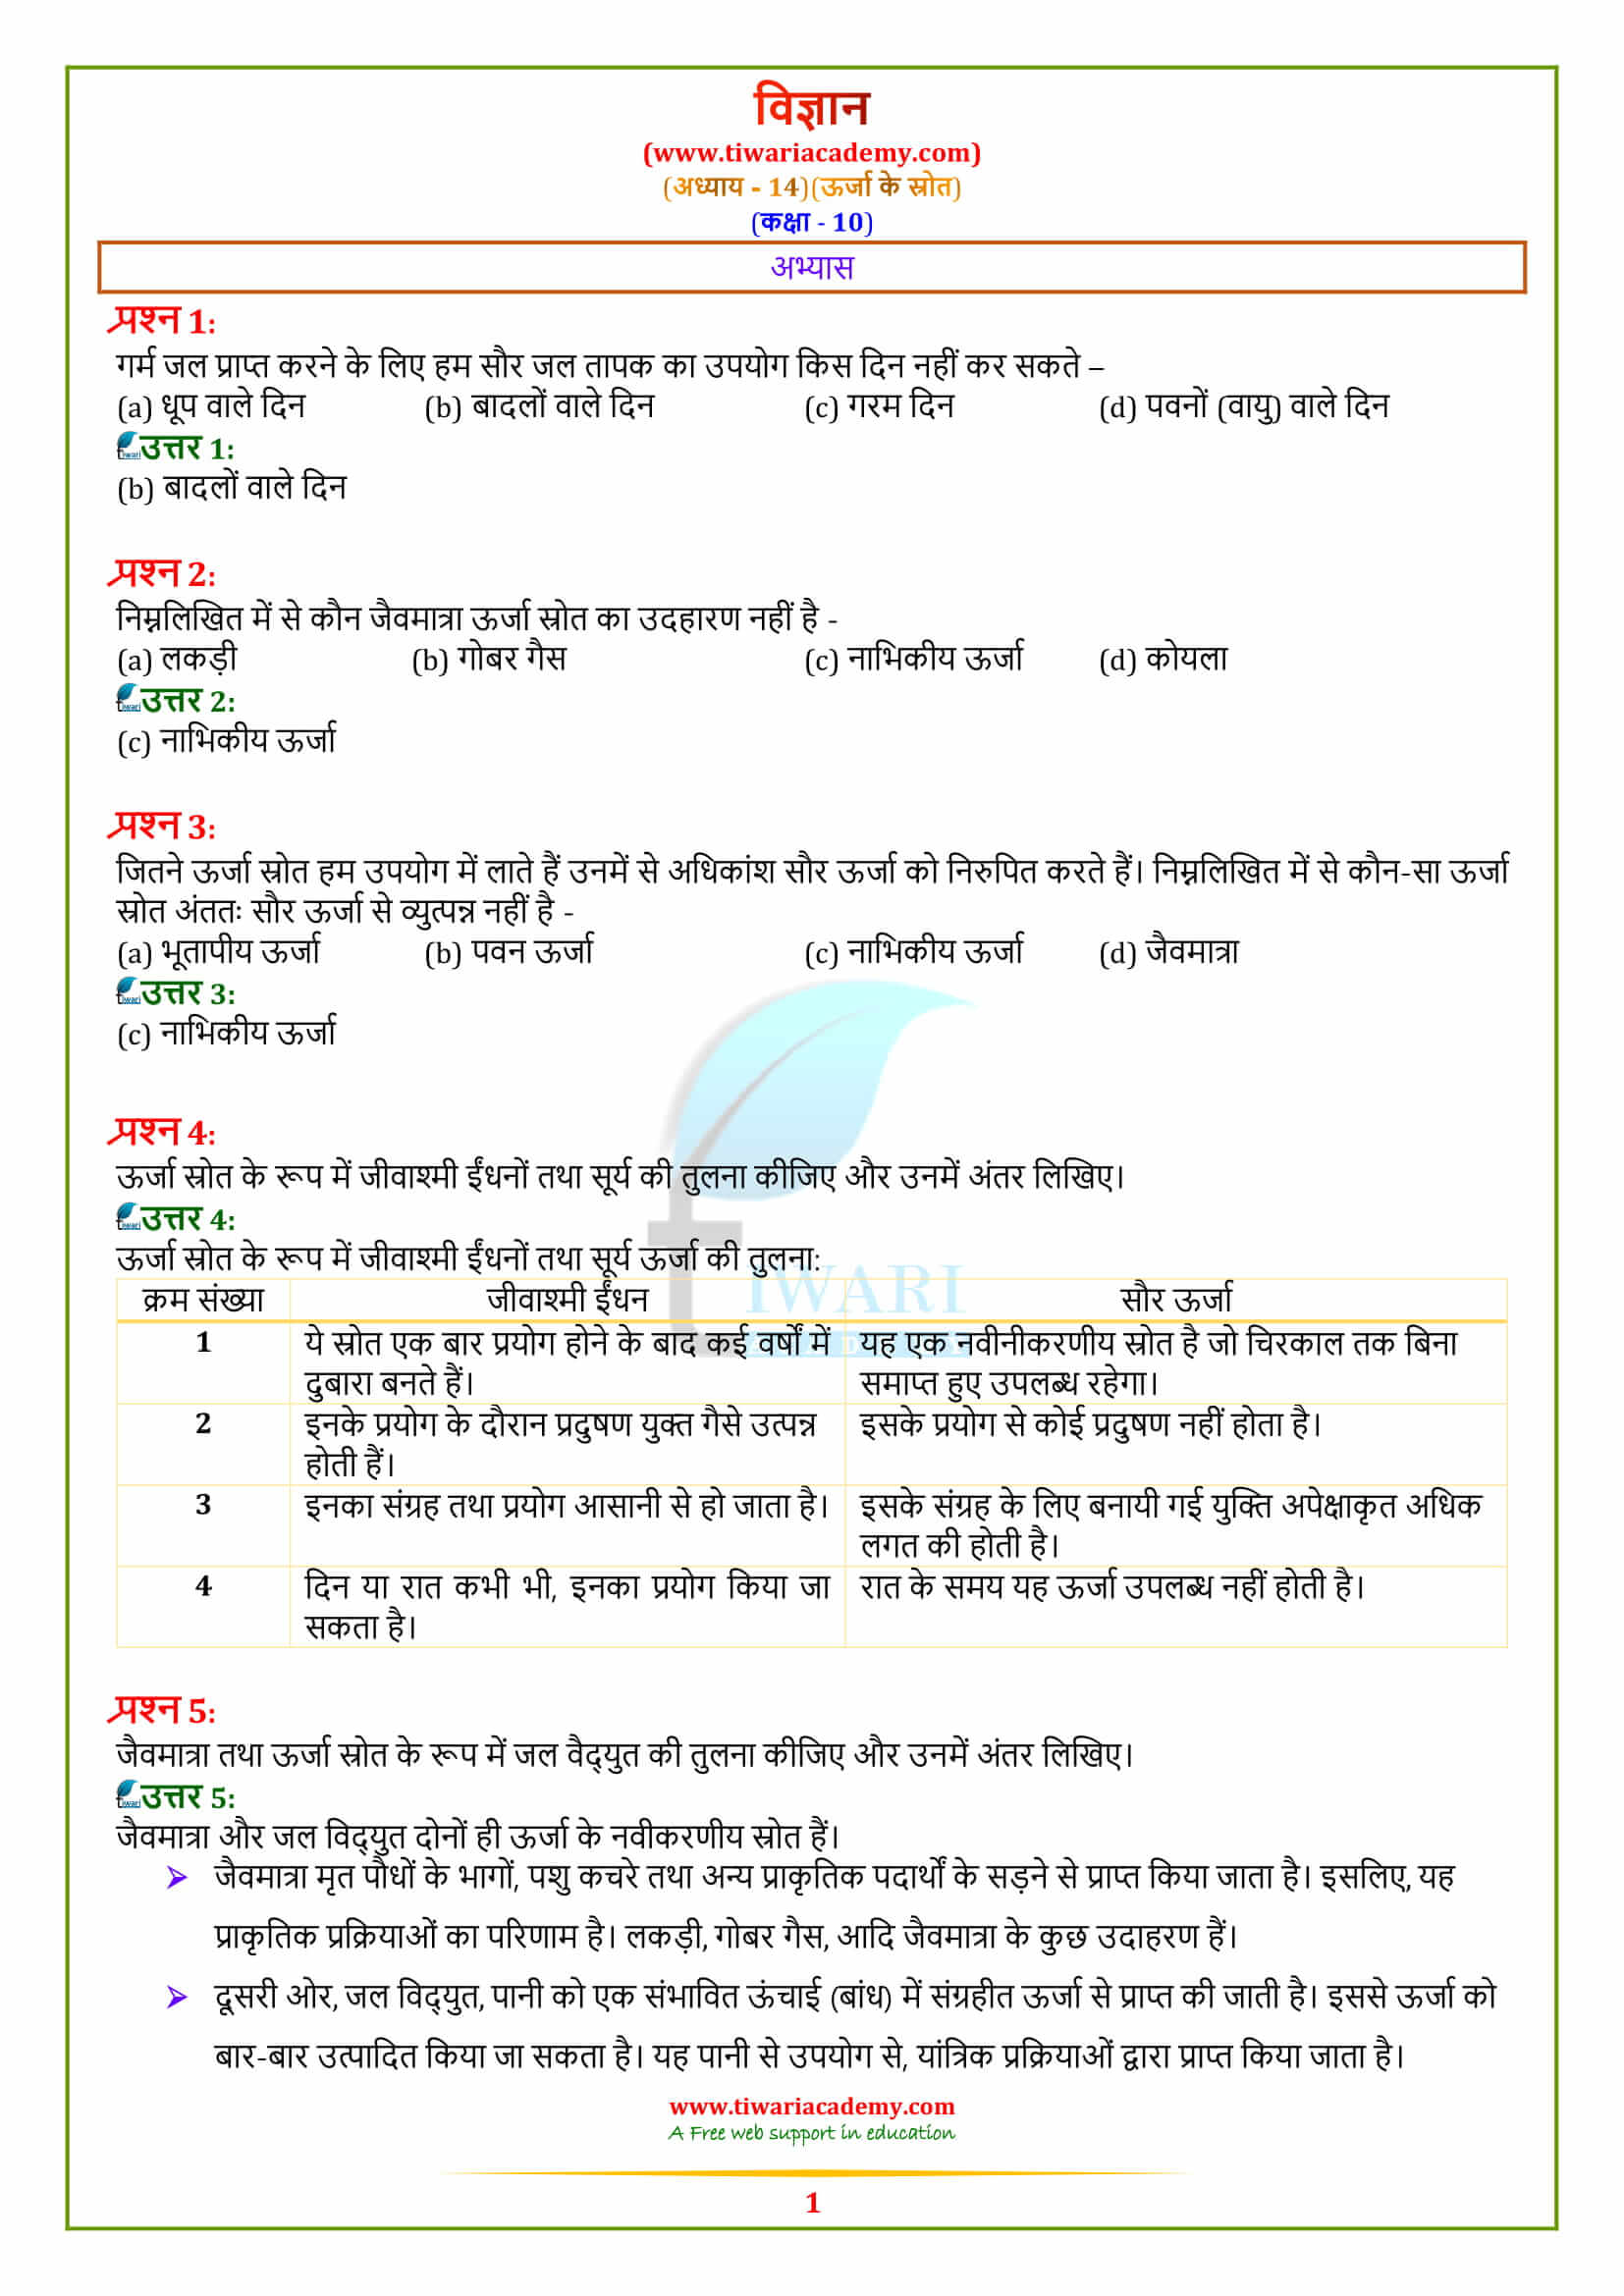 NCERT Solutions for Class 10 Science Chapter 14 Sources of Energy अभ्यास के उत्तर